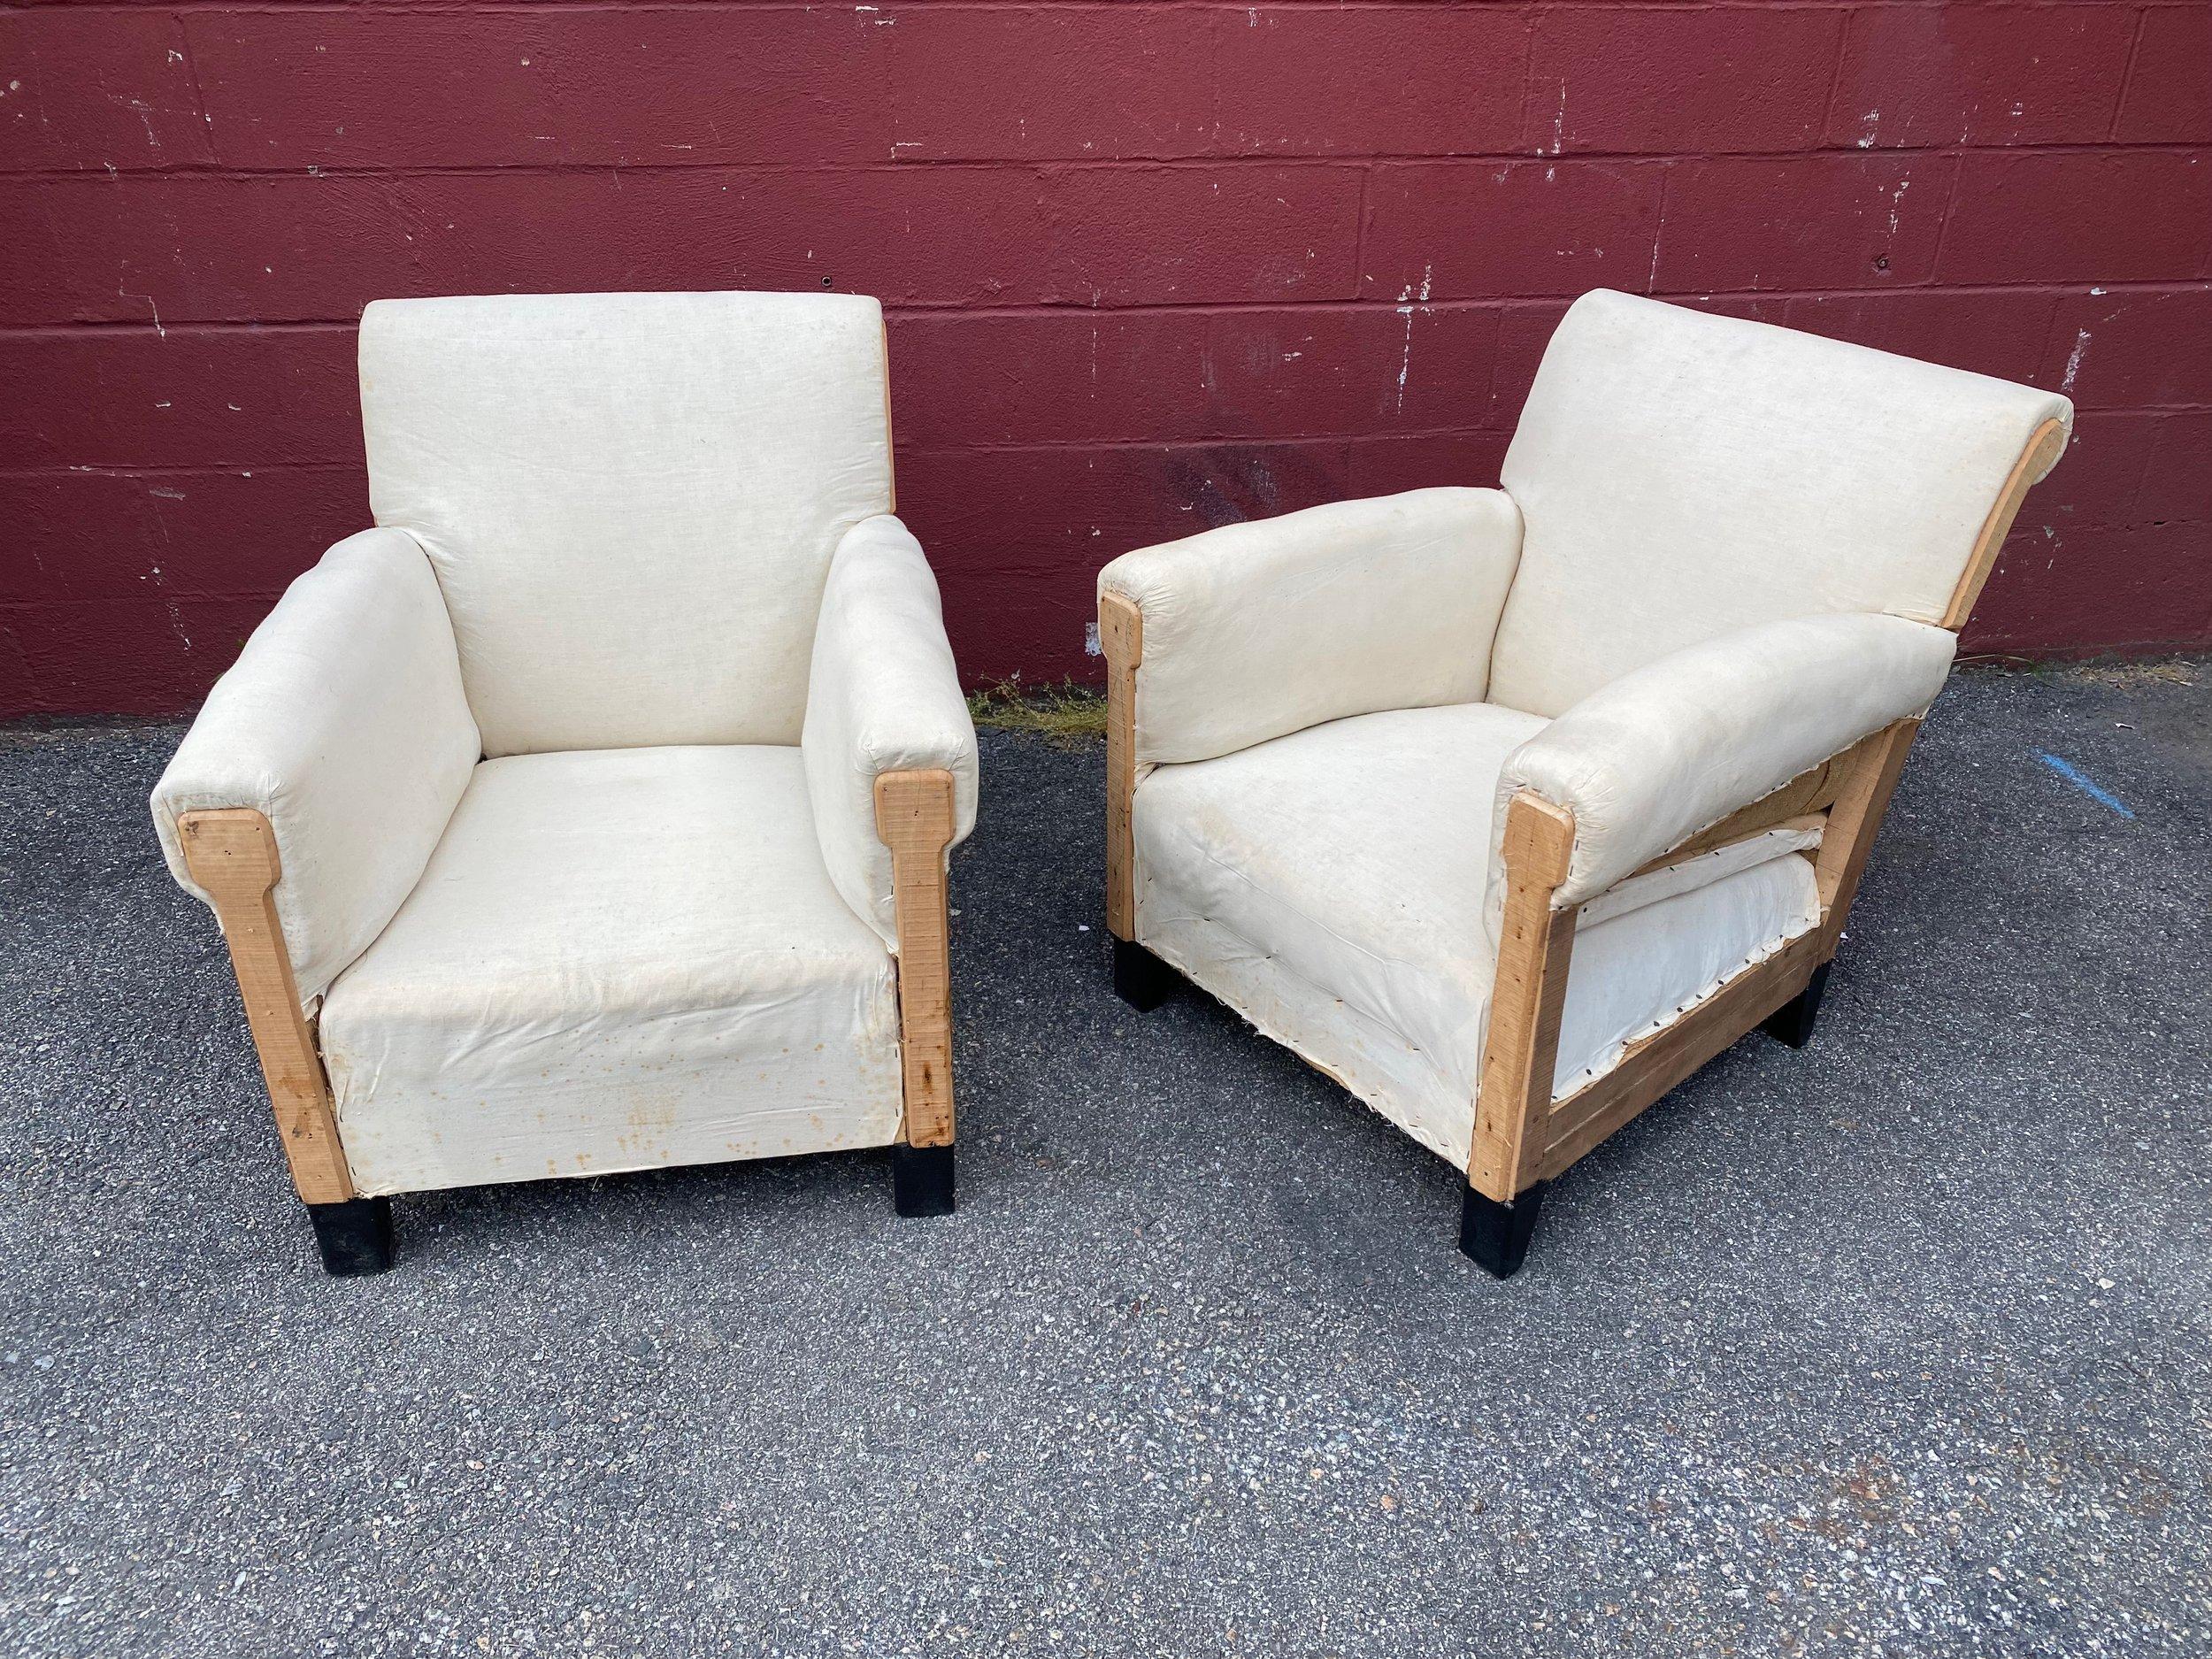 Take your lounge to new levels of French sophistication and timeless style with this beautiful pair of mid century modern club chairs. With classic French design and a chic update, these chairs are the perfect way to create an exclusive ambiance